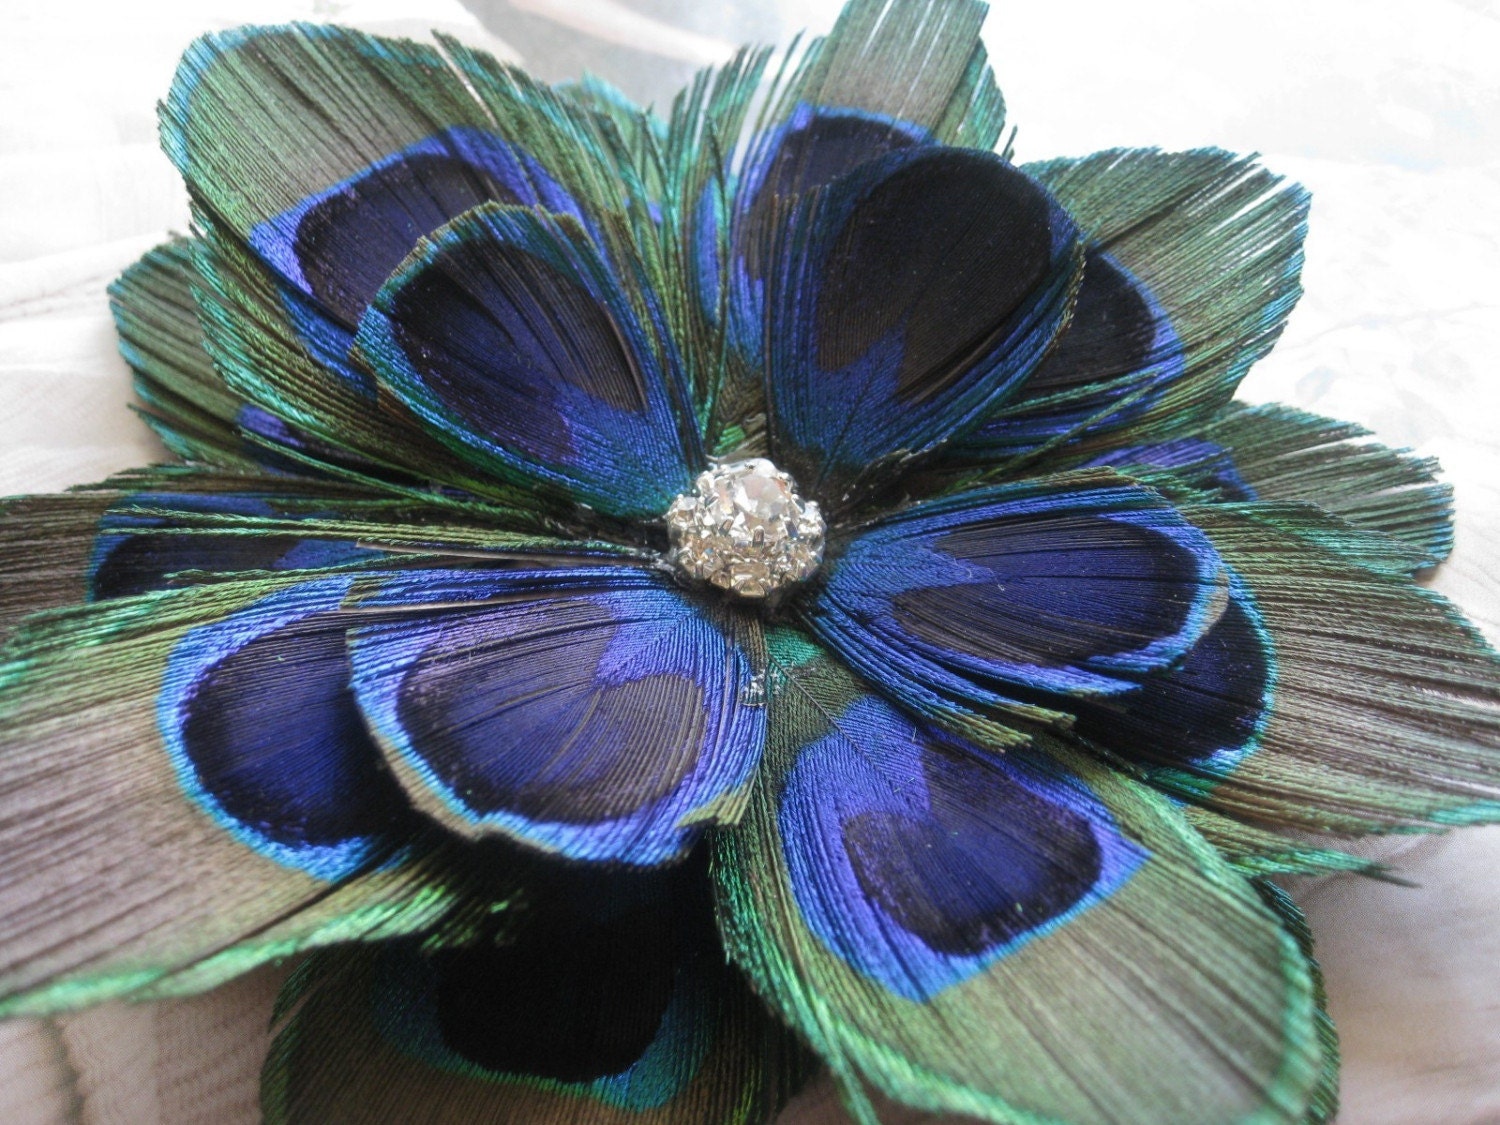 Handmade Accessories on Etsy Lotus Peacock Peacock feather fascinator